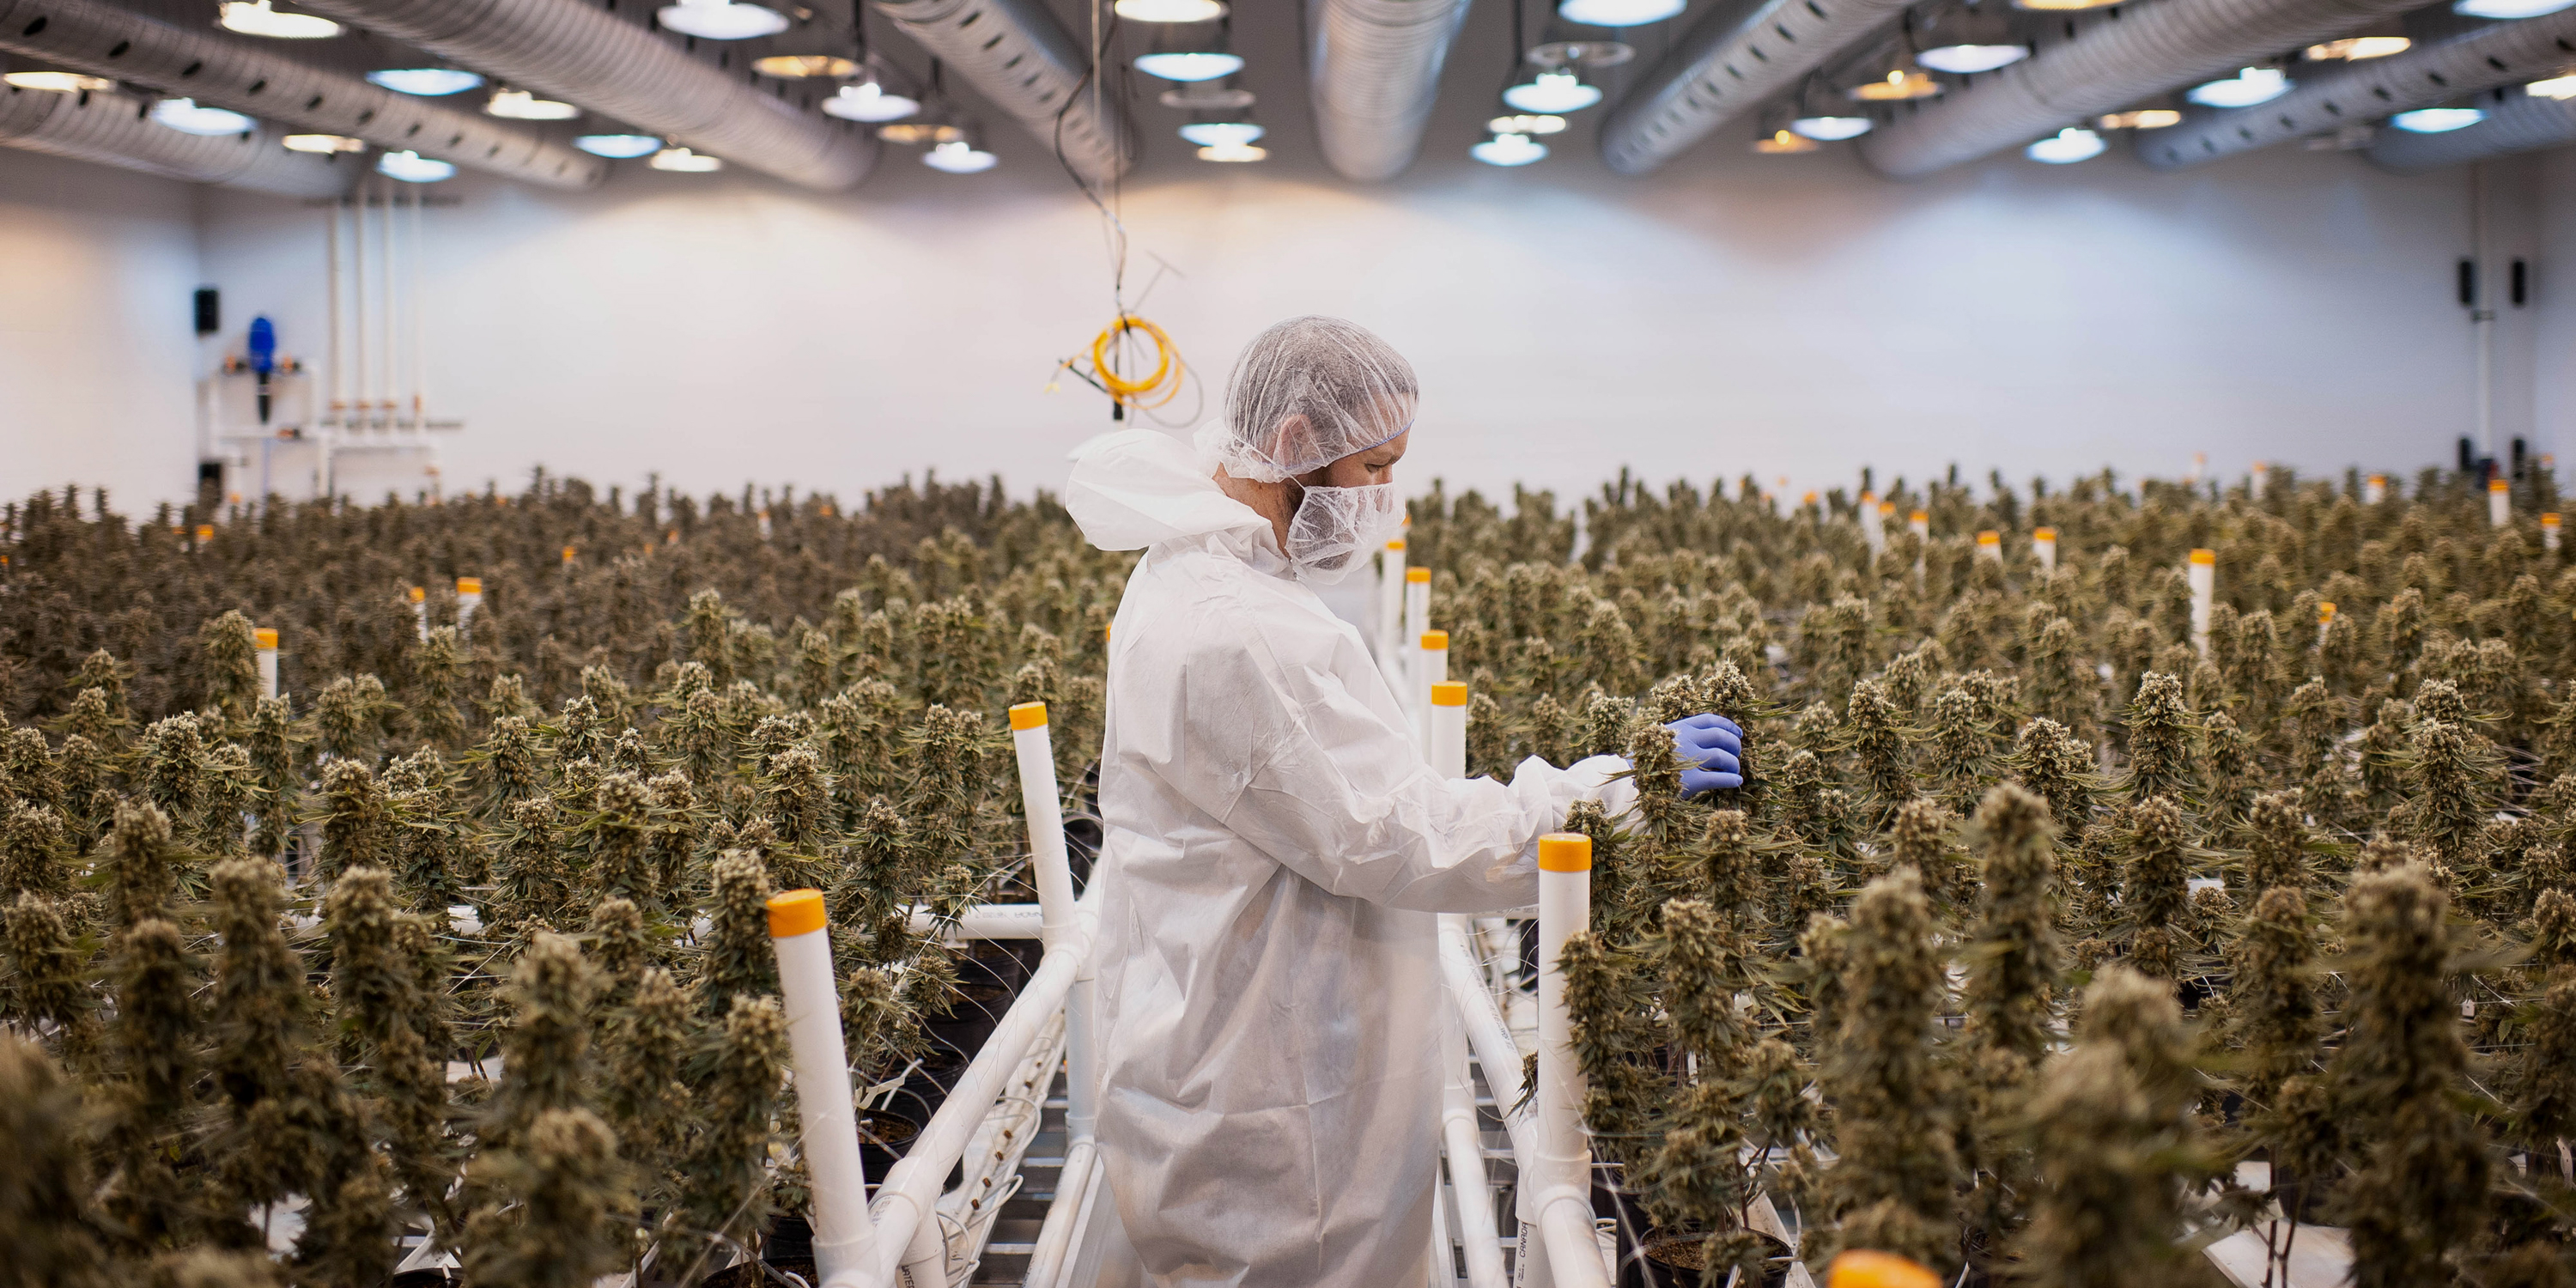 Canada's Cannabis Industry To Create 150,000 Legal Weed Jobs